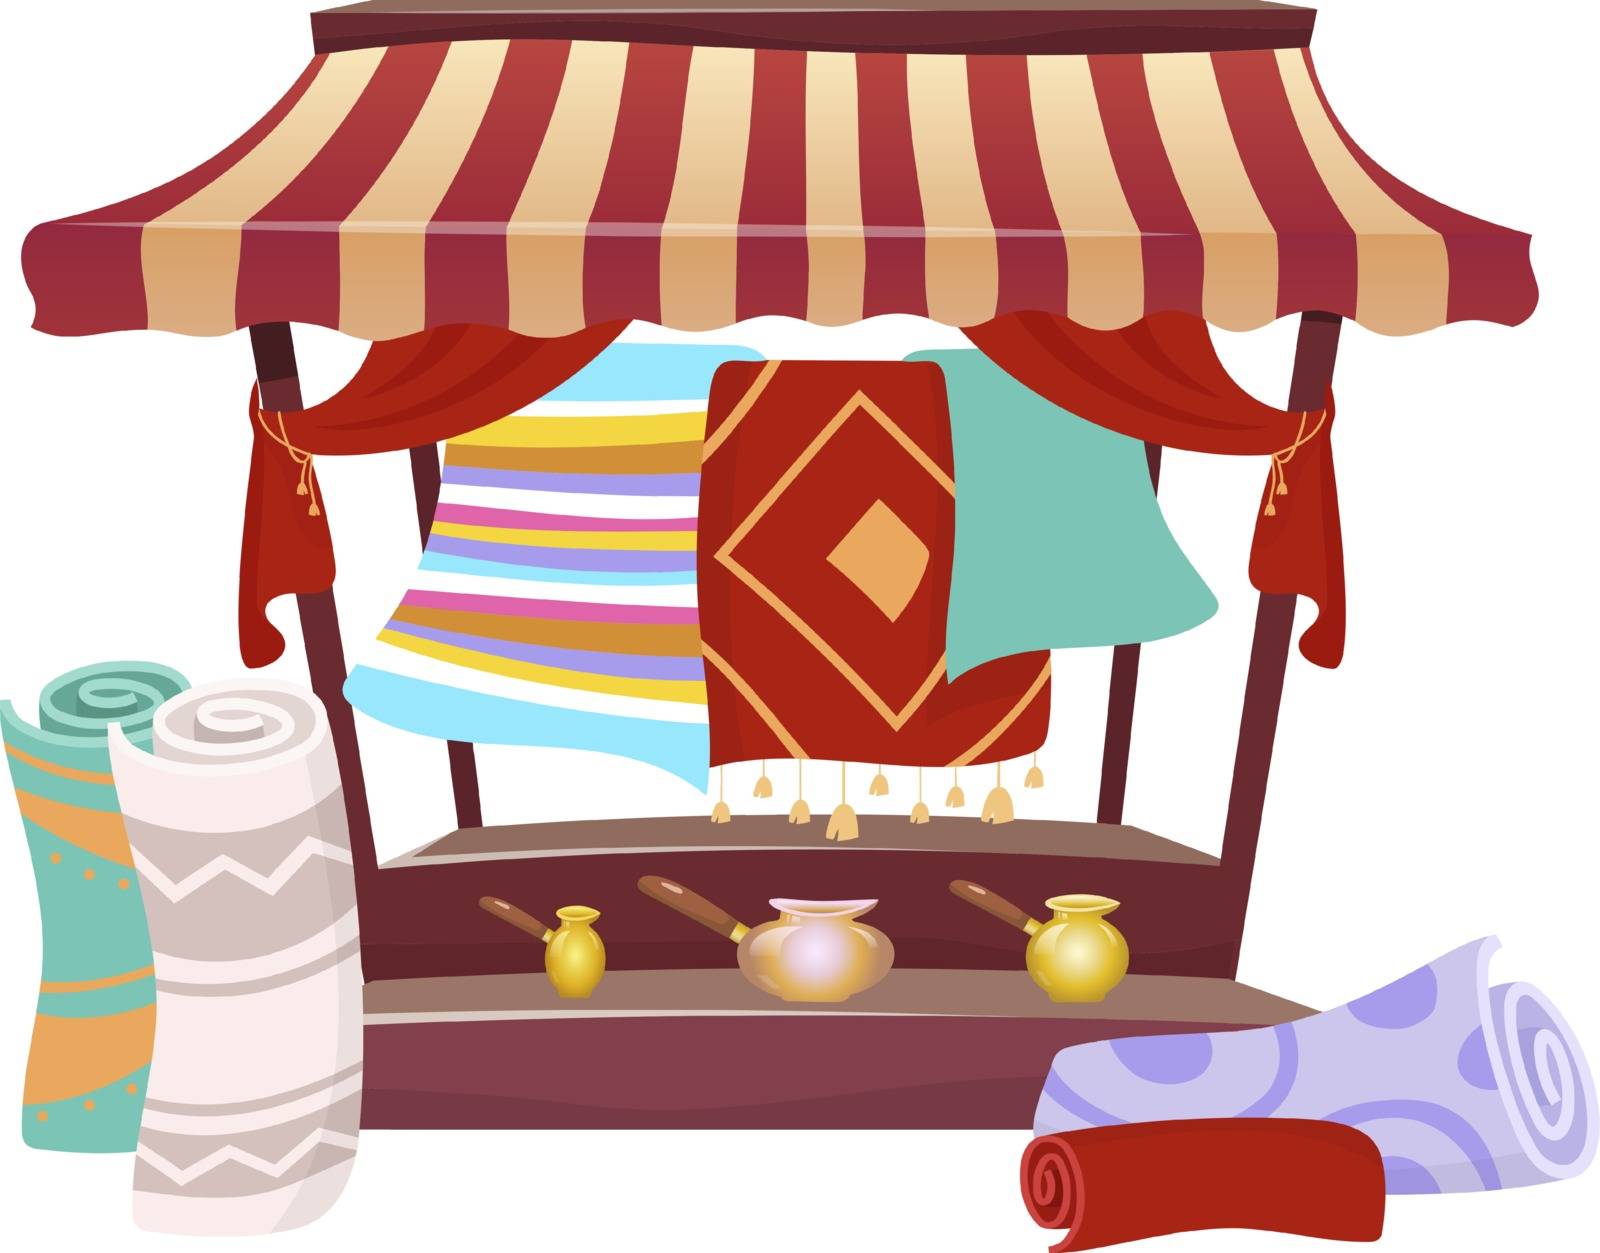 Bazaar trade awning with handmade carpets cartoon vector illustration. Eastern marketplace tent, canopy with souvenirs, persian rugs flat color object. Asian fair marquee isolated on white background by ntl